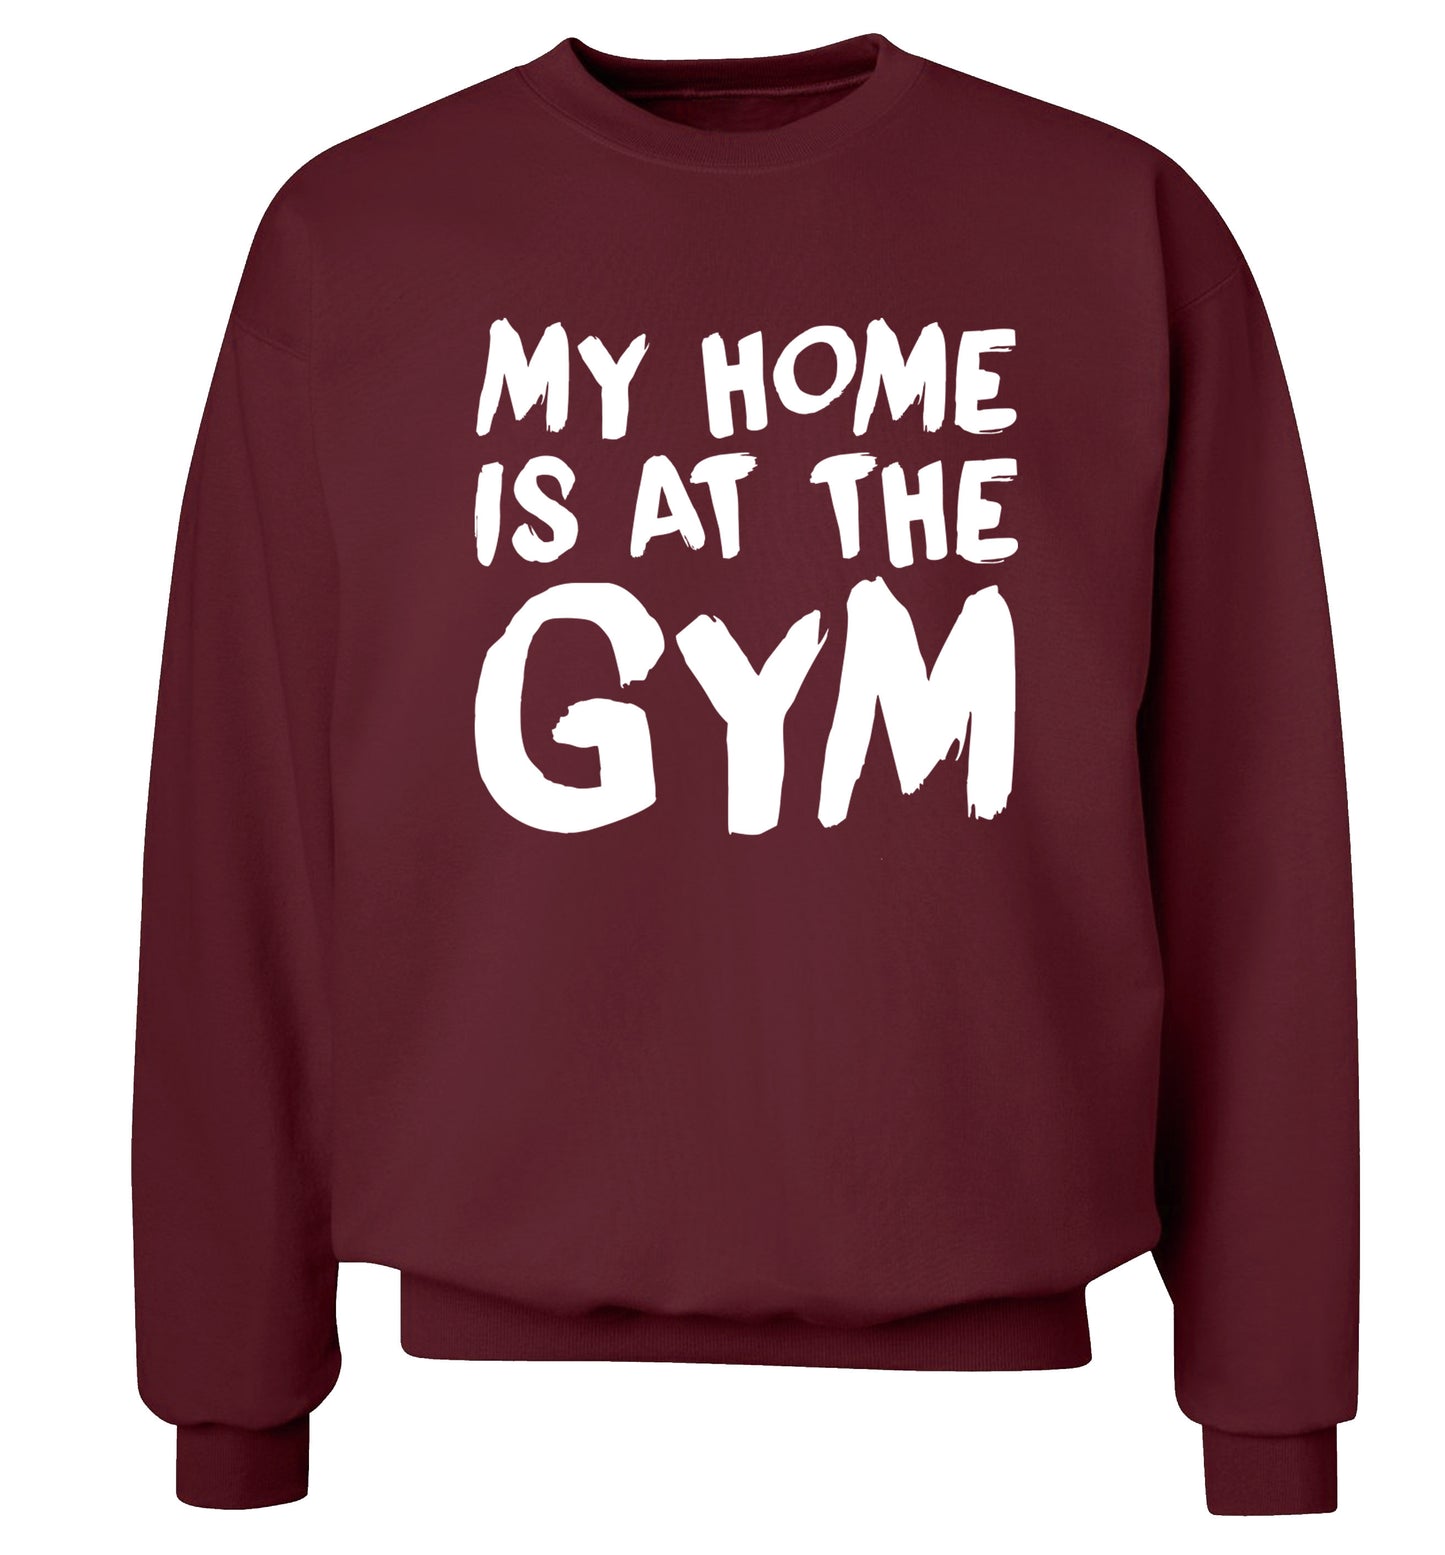 My home is at the gym Adult's unisex maroon Sweater 2XL